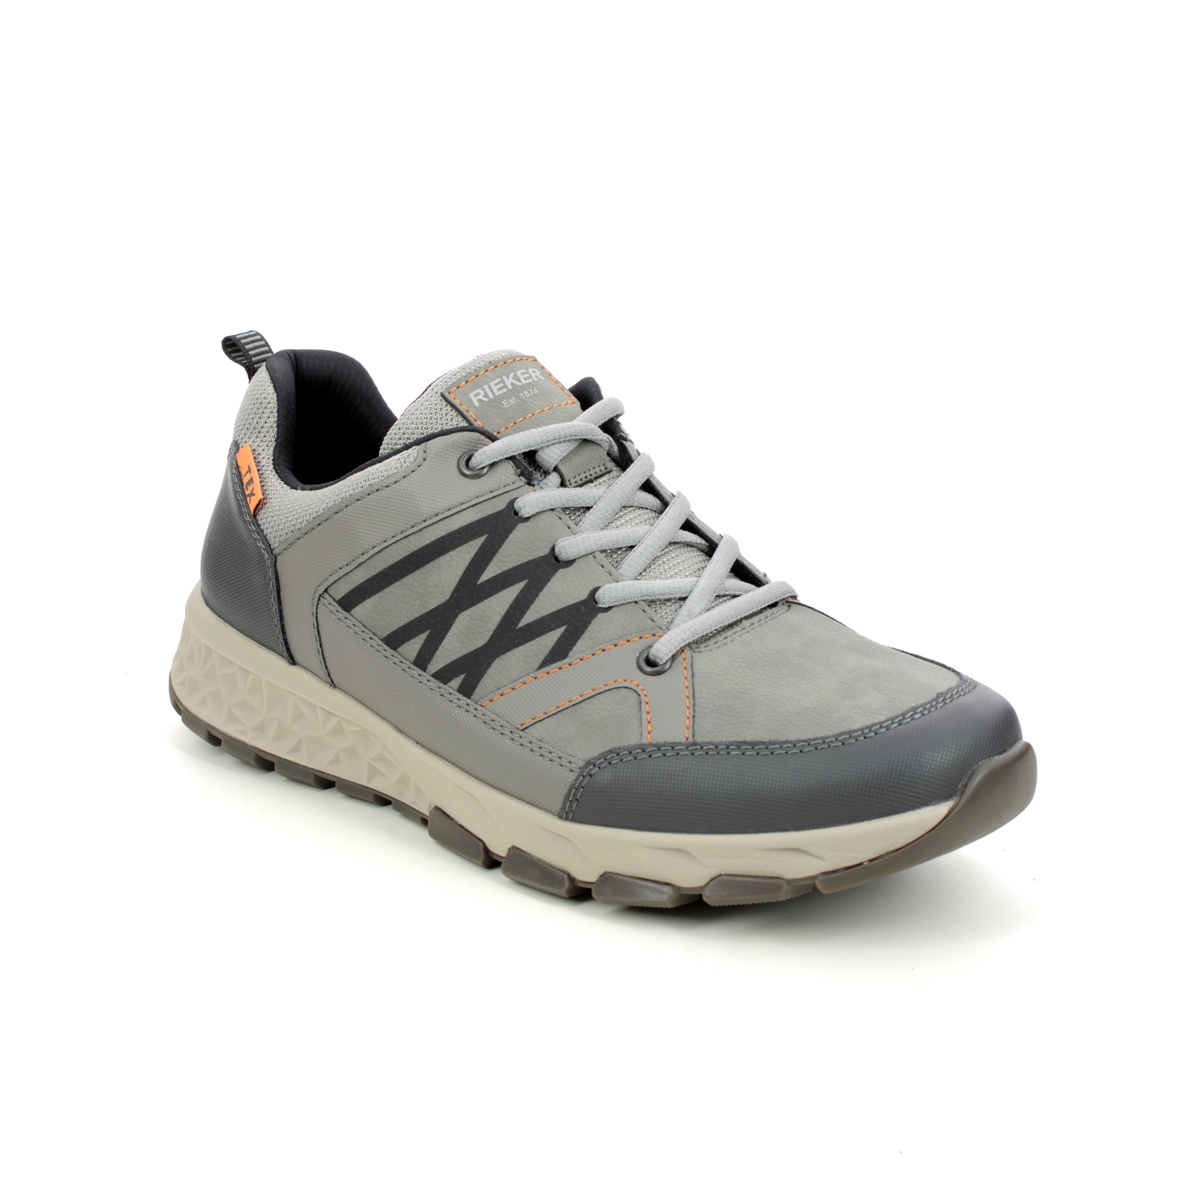 Rieker B6711-40 Grey Mens Walking Shoes in a Plain Man-made in Size 44